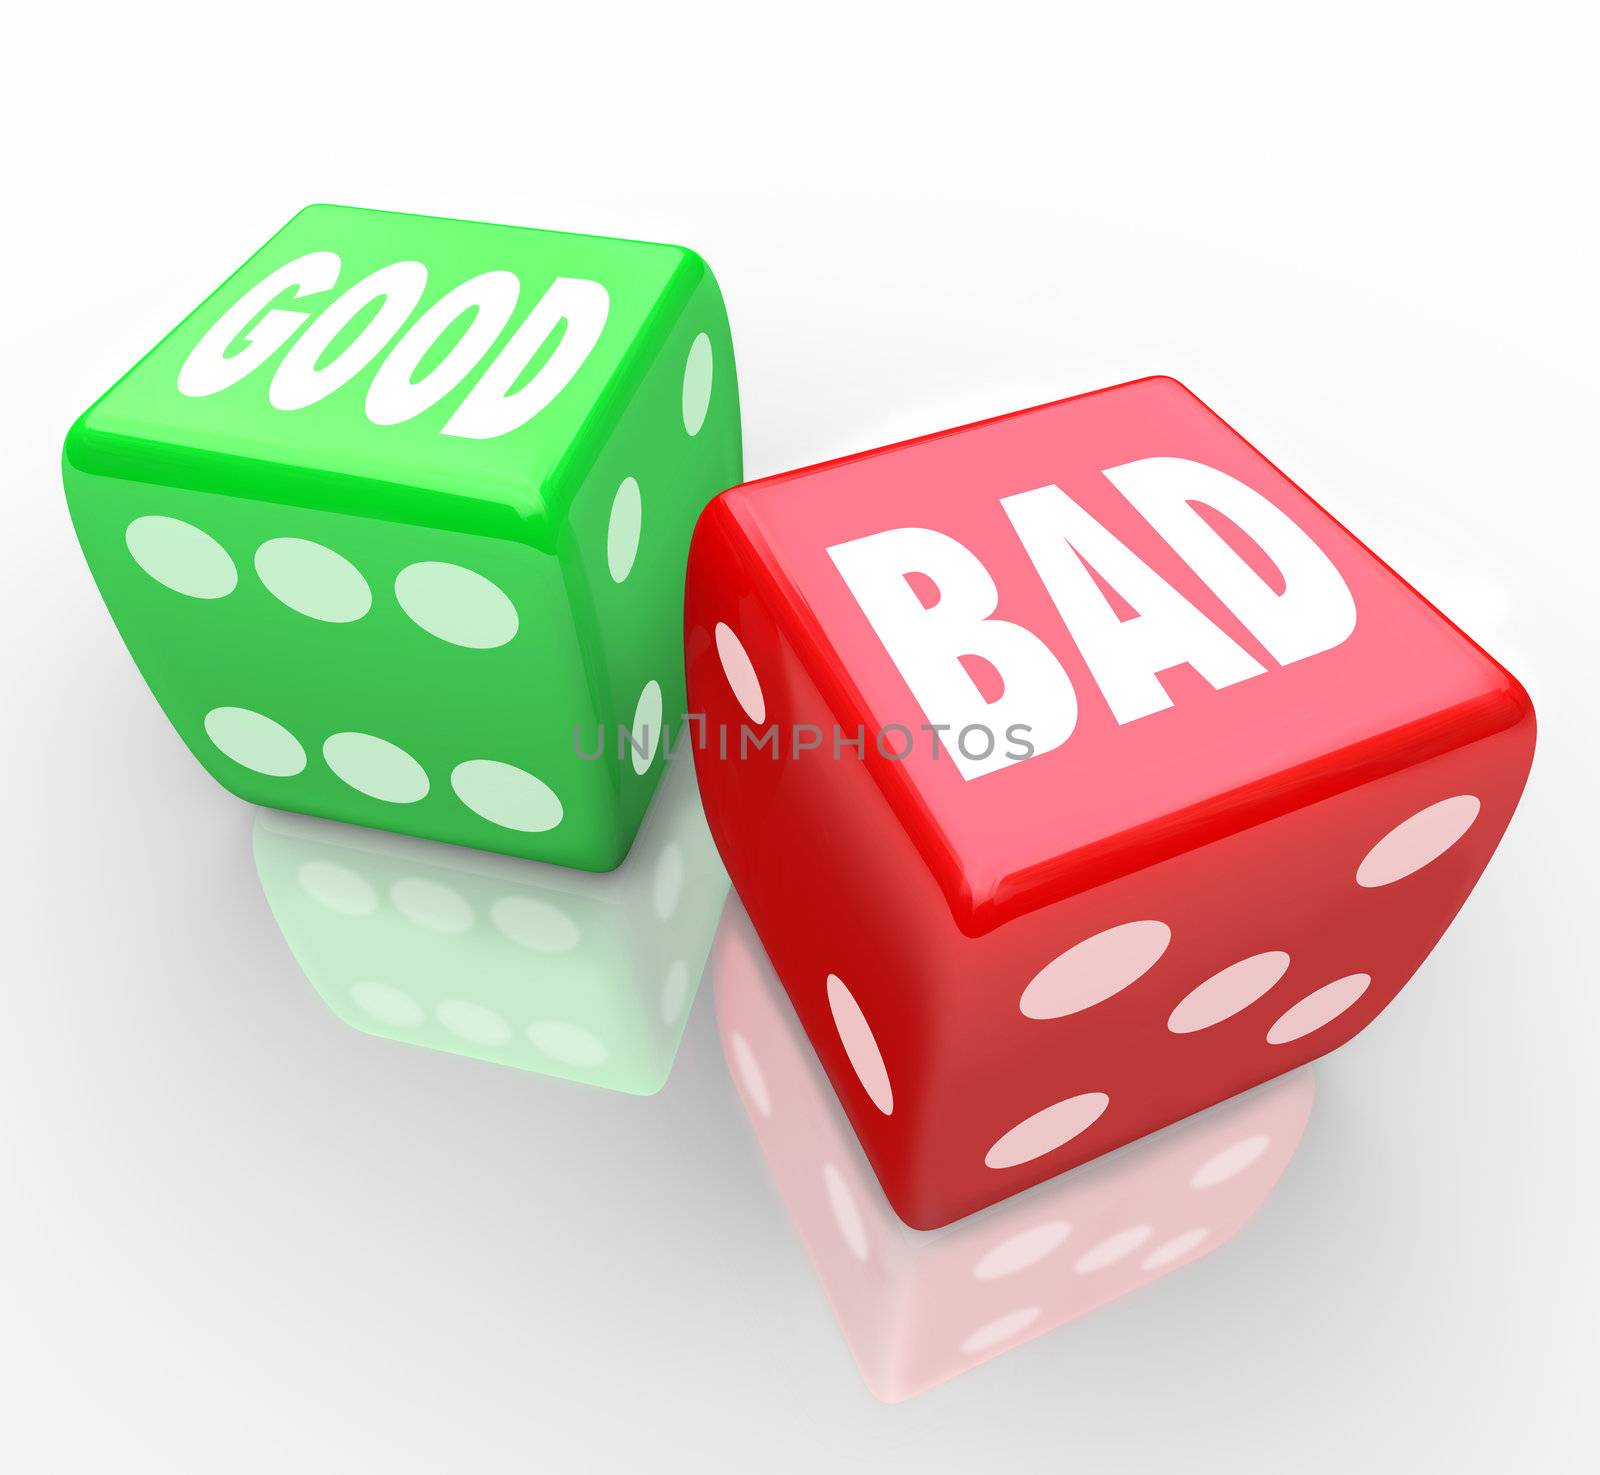 A red dice with the word Bad and a green die with the word Good for you to roll and determine the outcome of a game or situation, will the answer be positive or negative